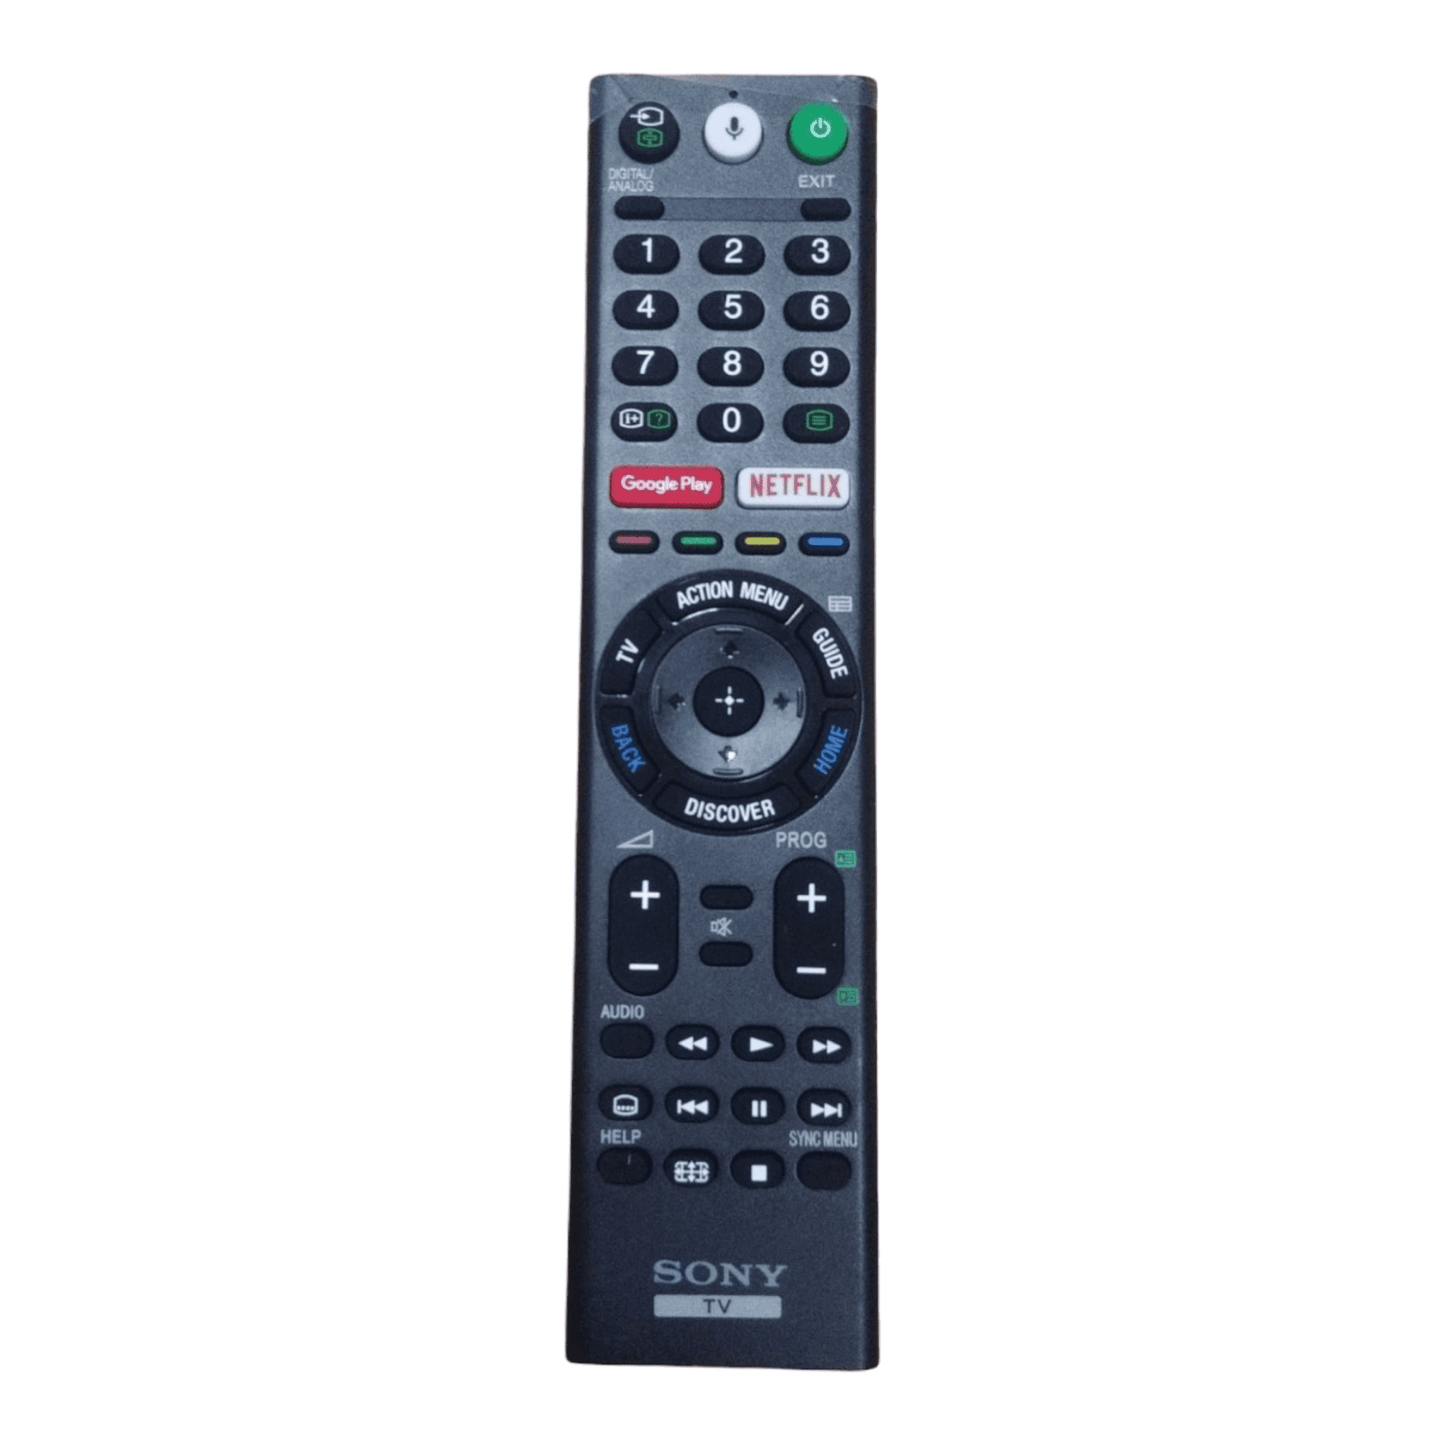 Sony Smart TV remote control Netflix,Google play,voice recognisation - Faritha